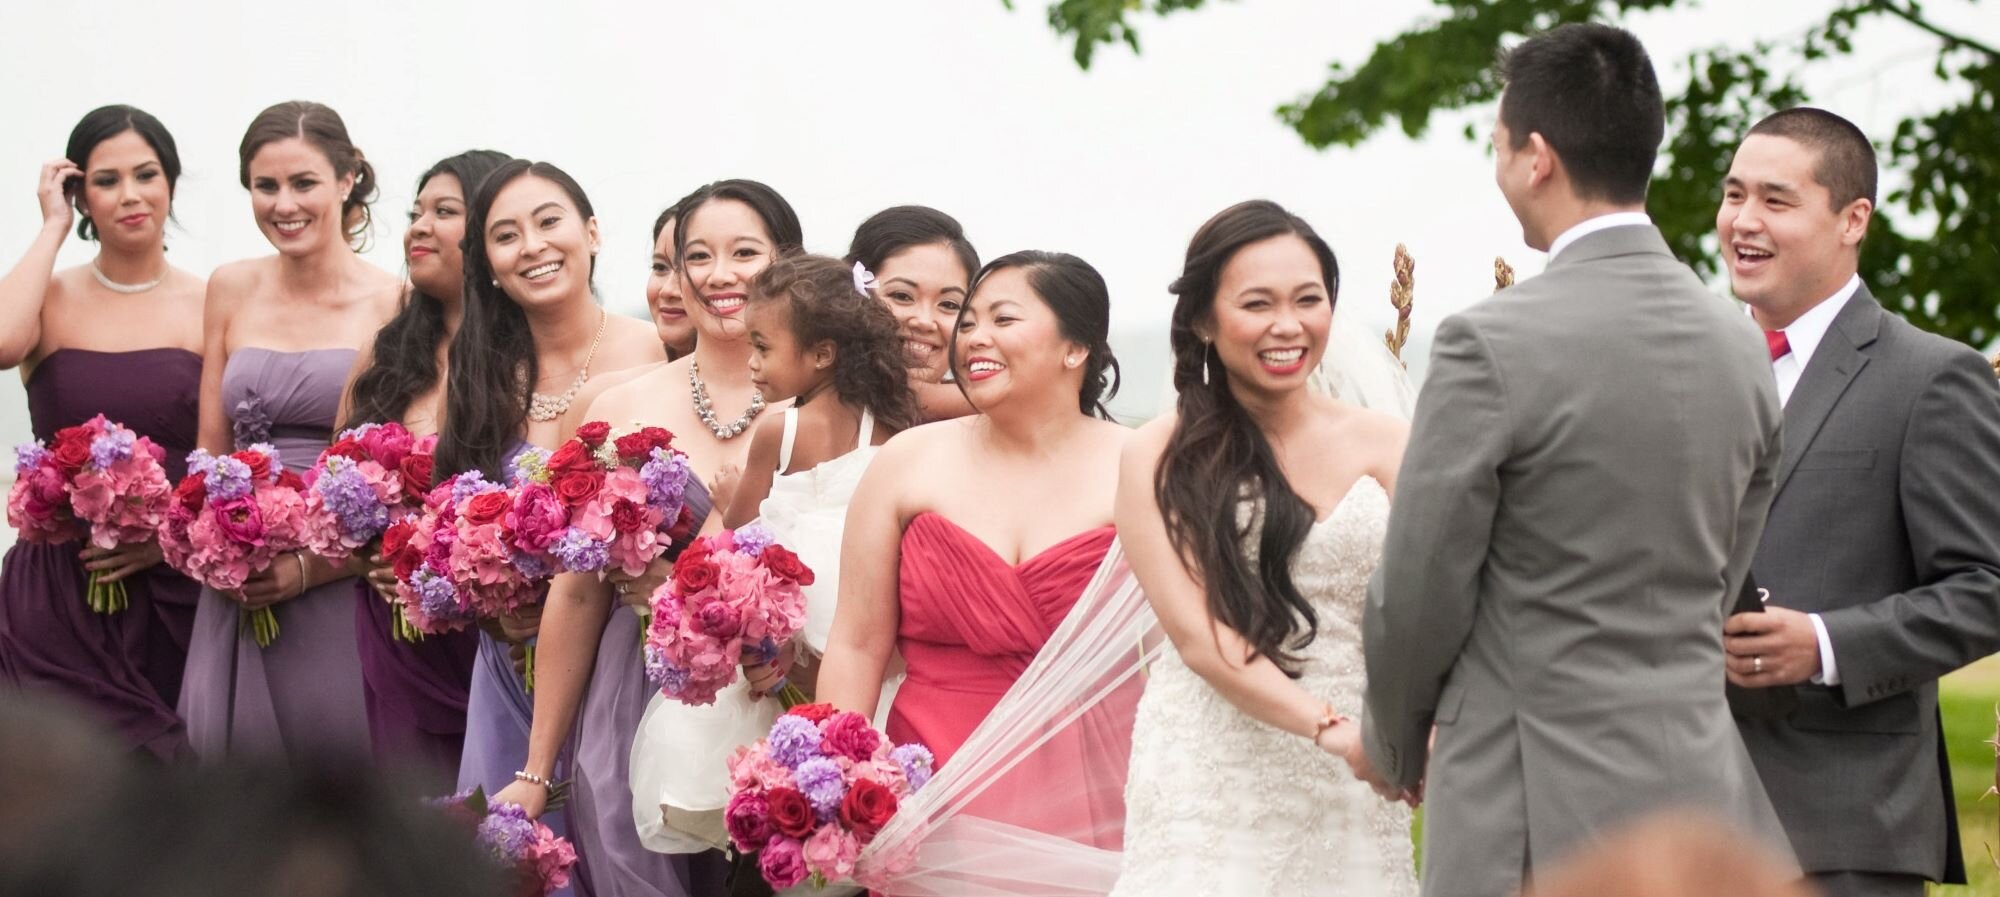 Rose and Hydrangea Bridal party flowers.jpg